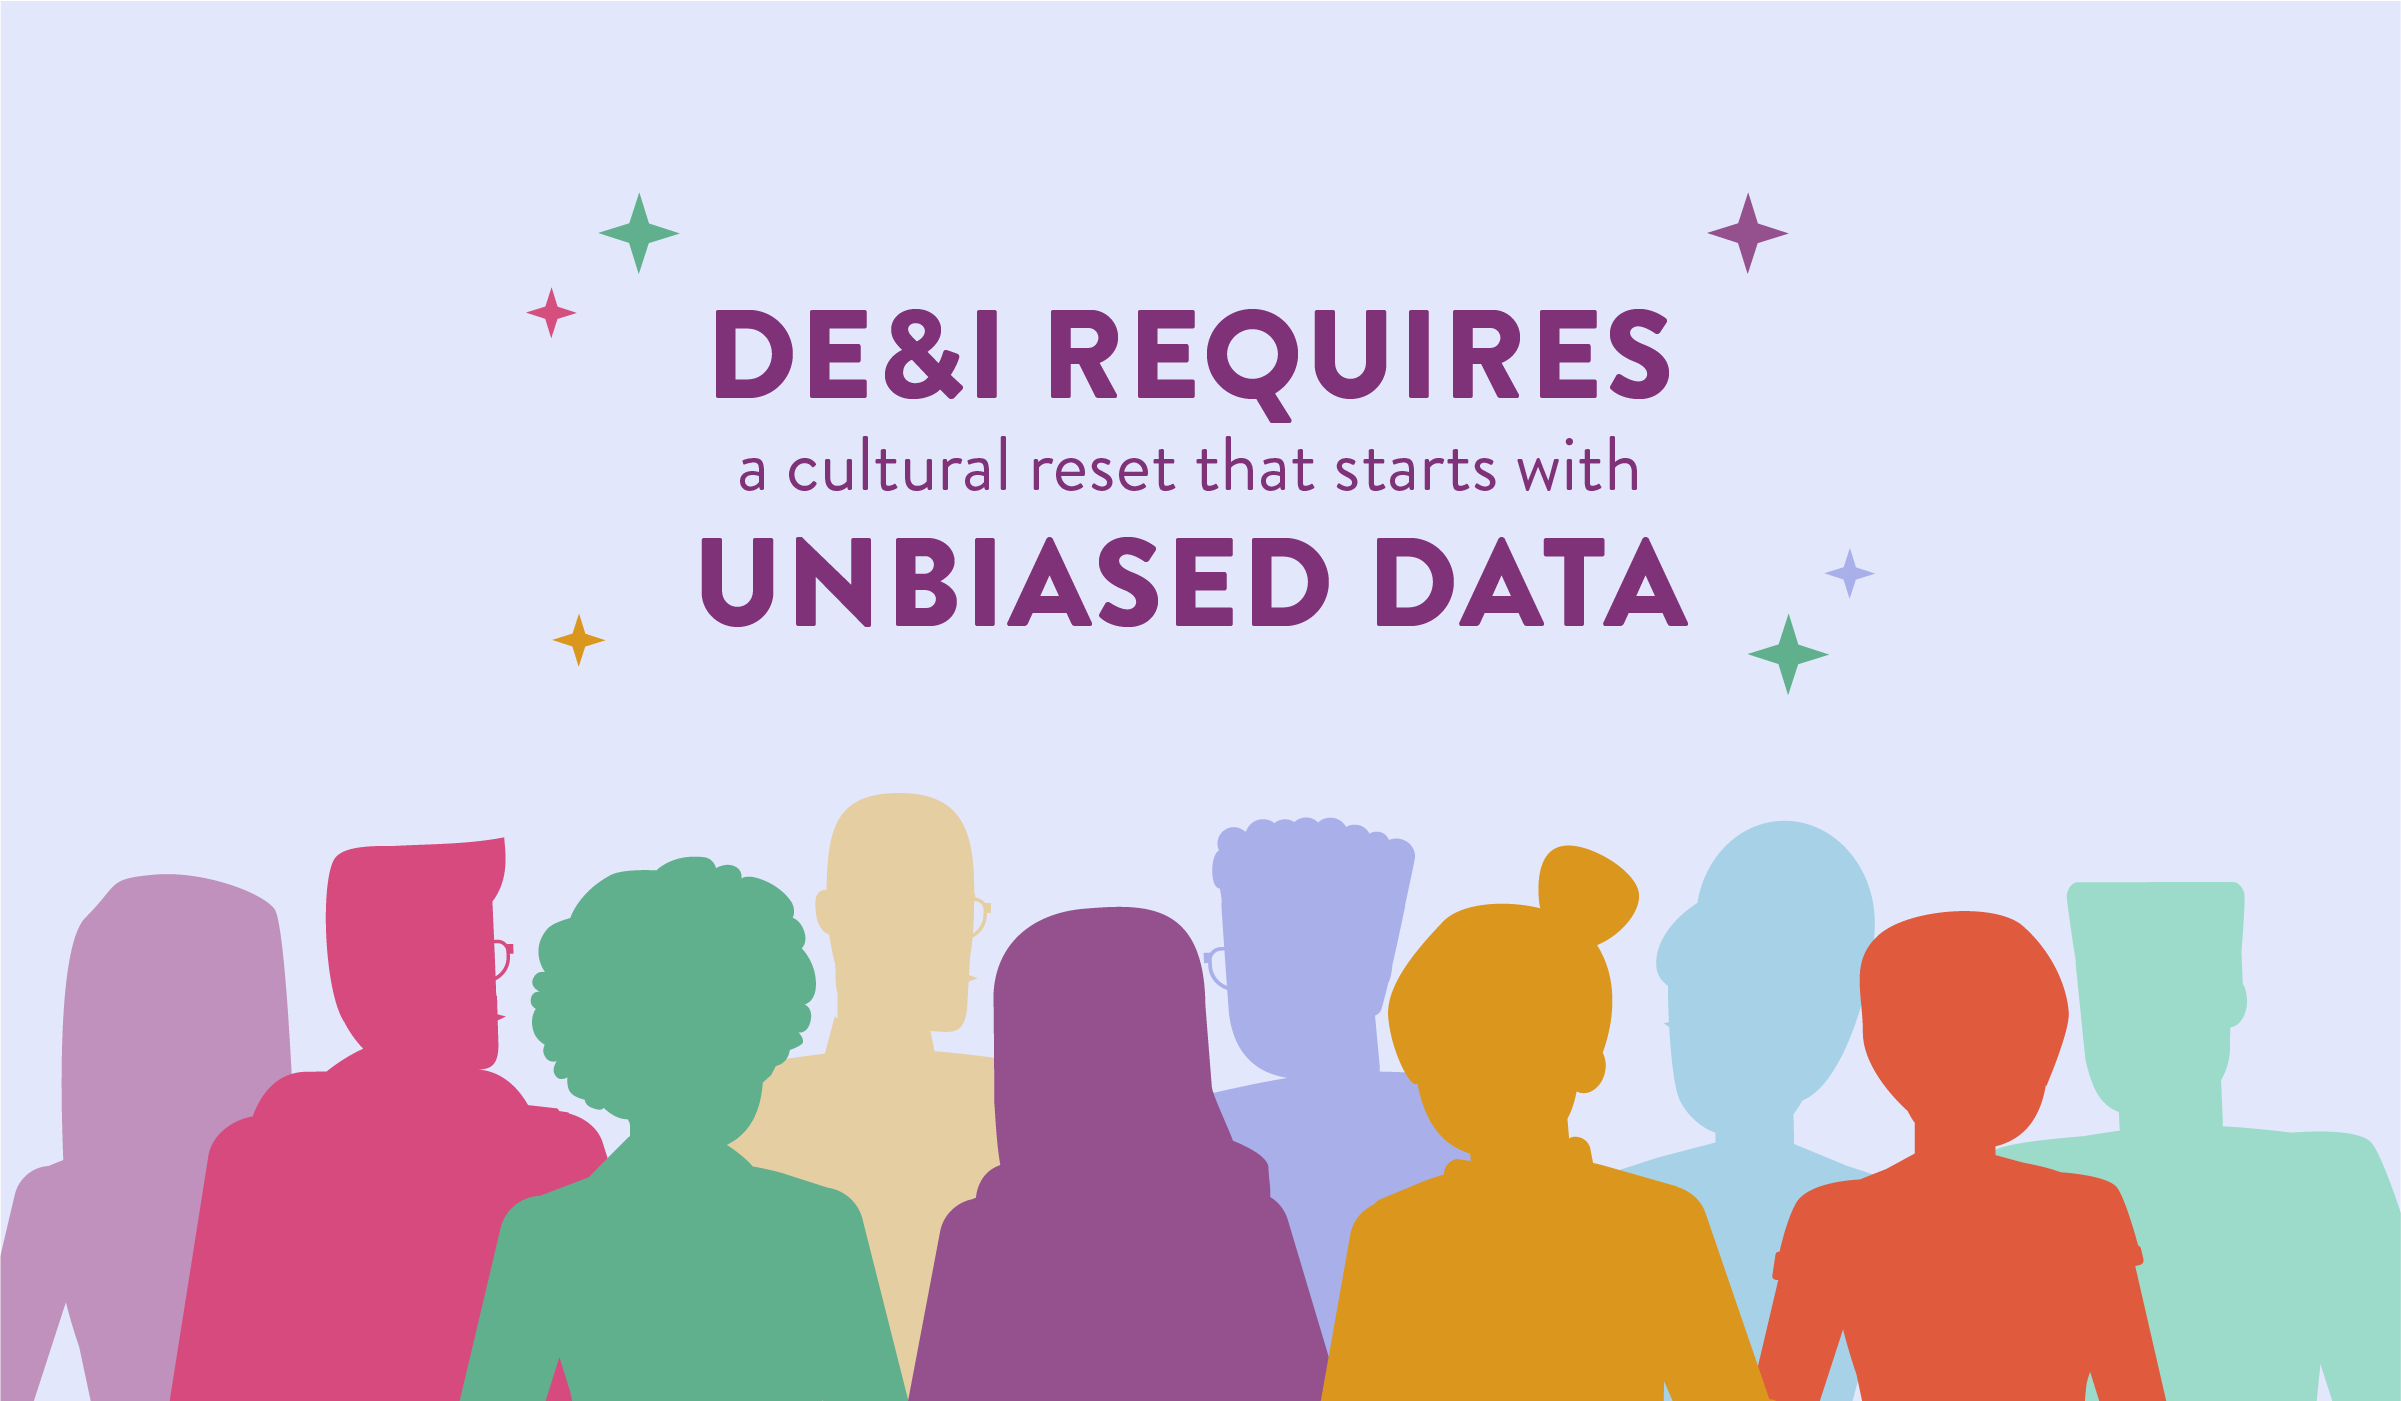 DE&I Requires a Culture Reset That Starts with Unbiased Data